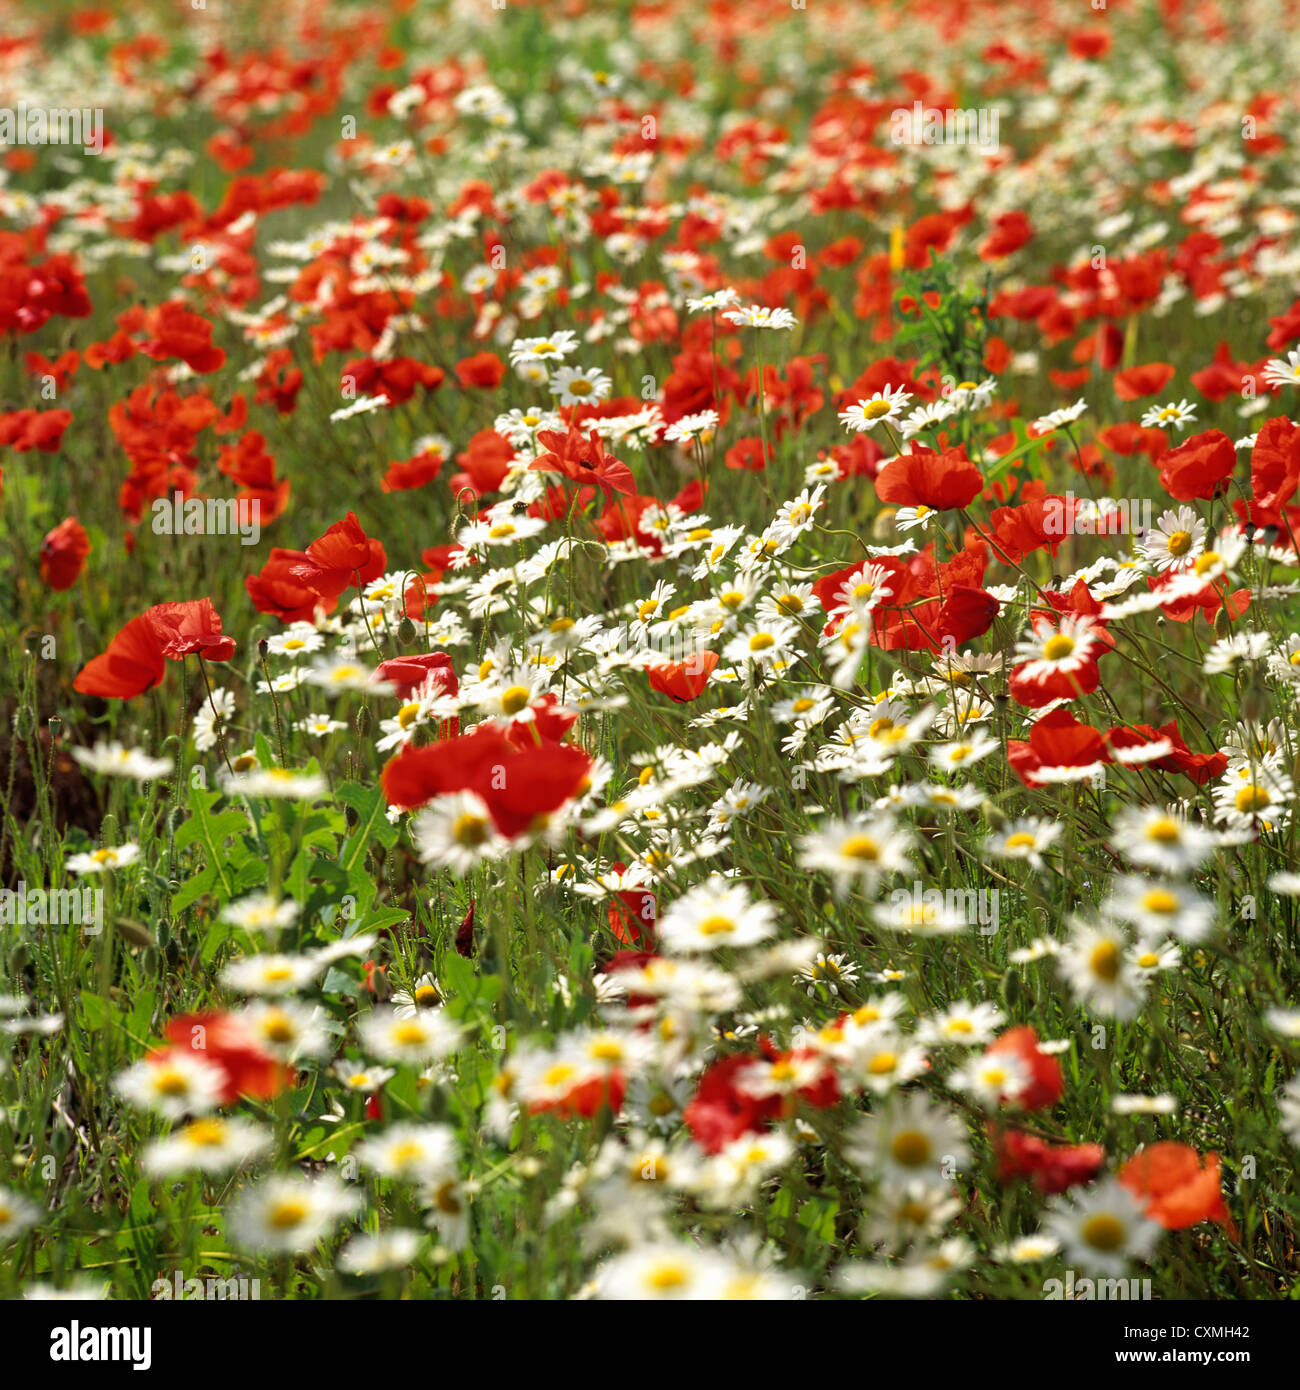 Field of poppies and daisies Stock Photo